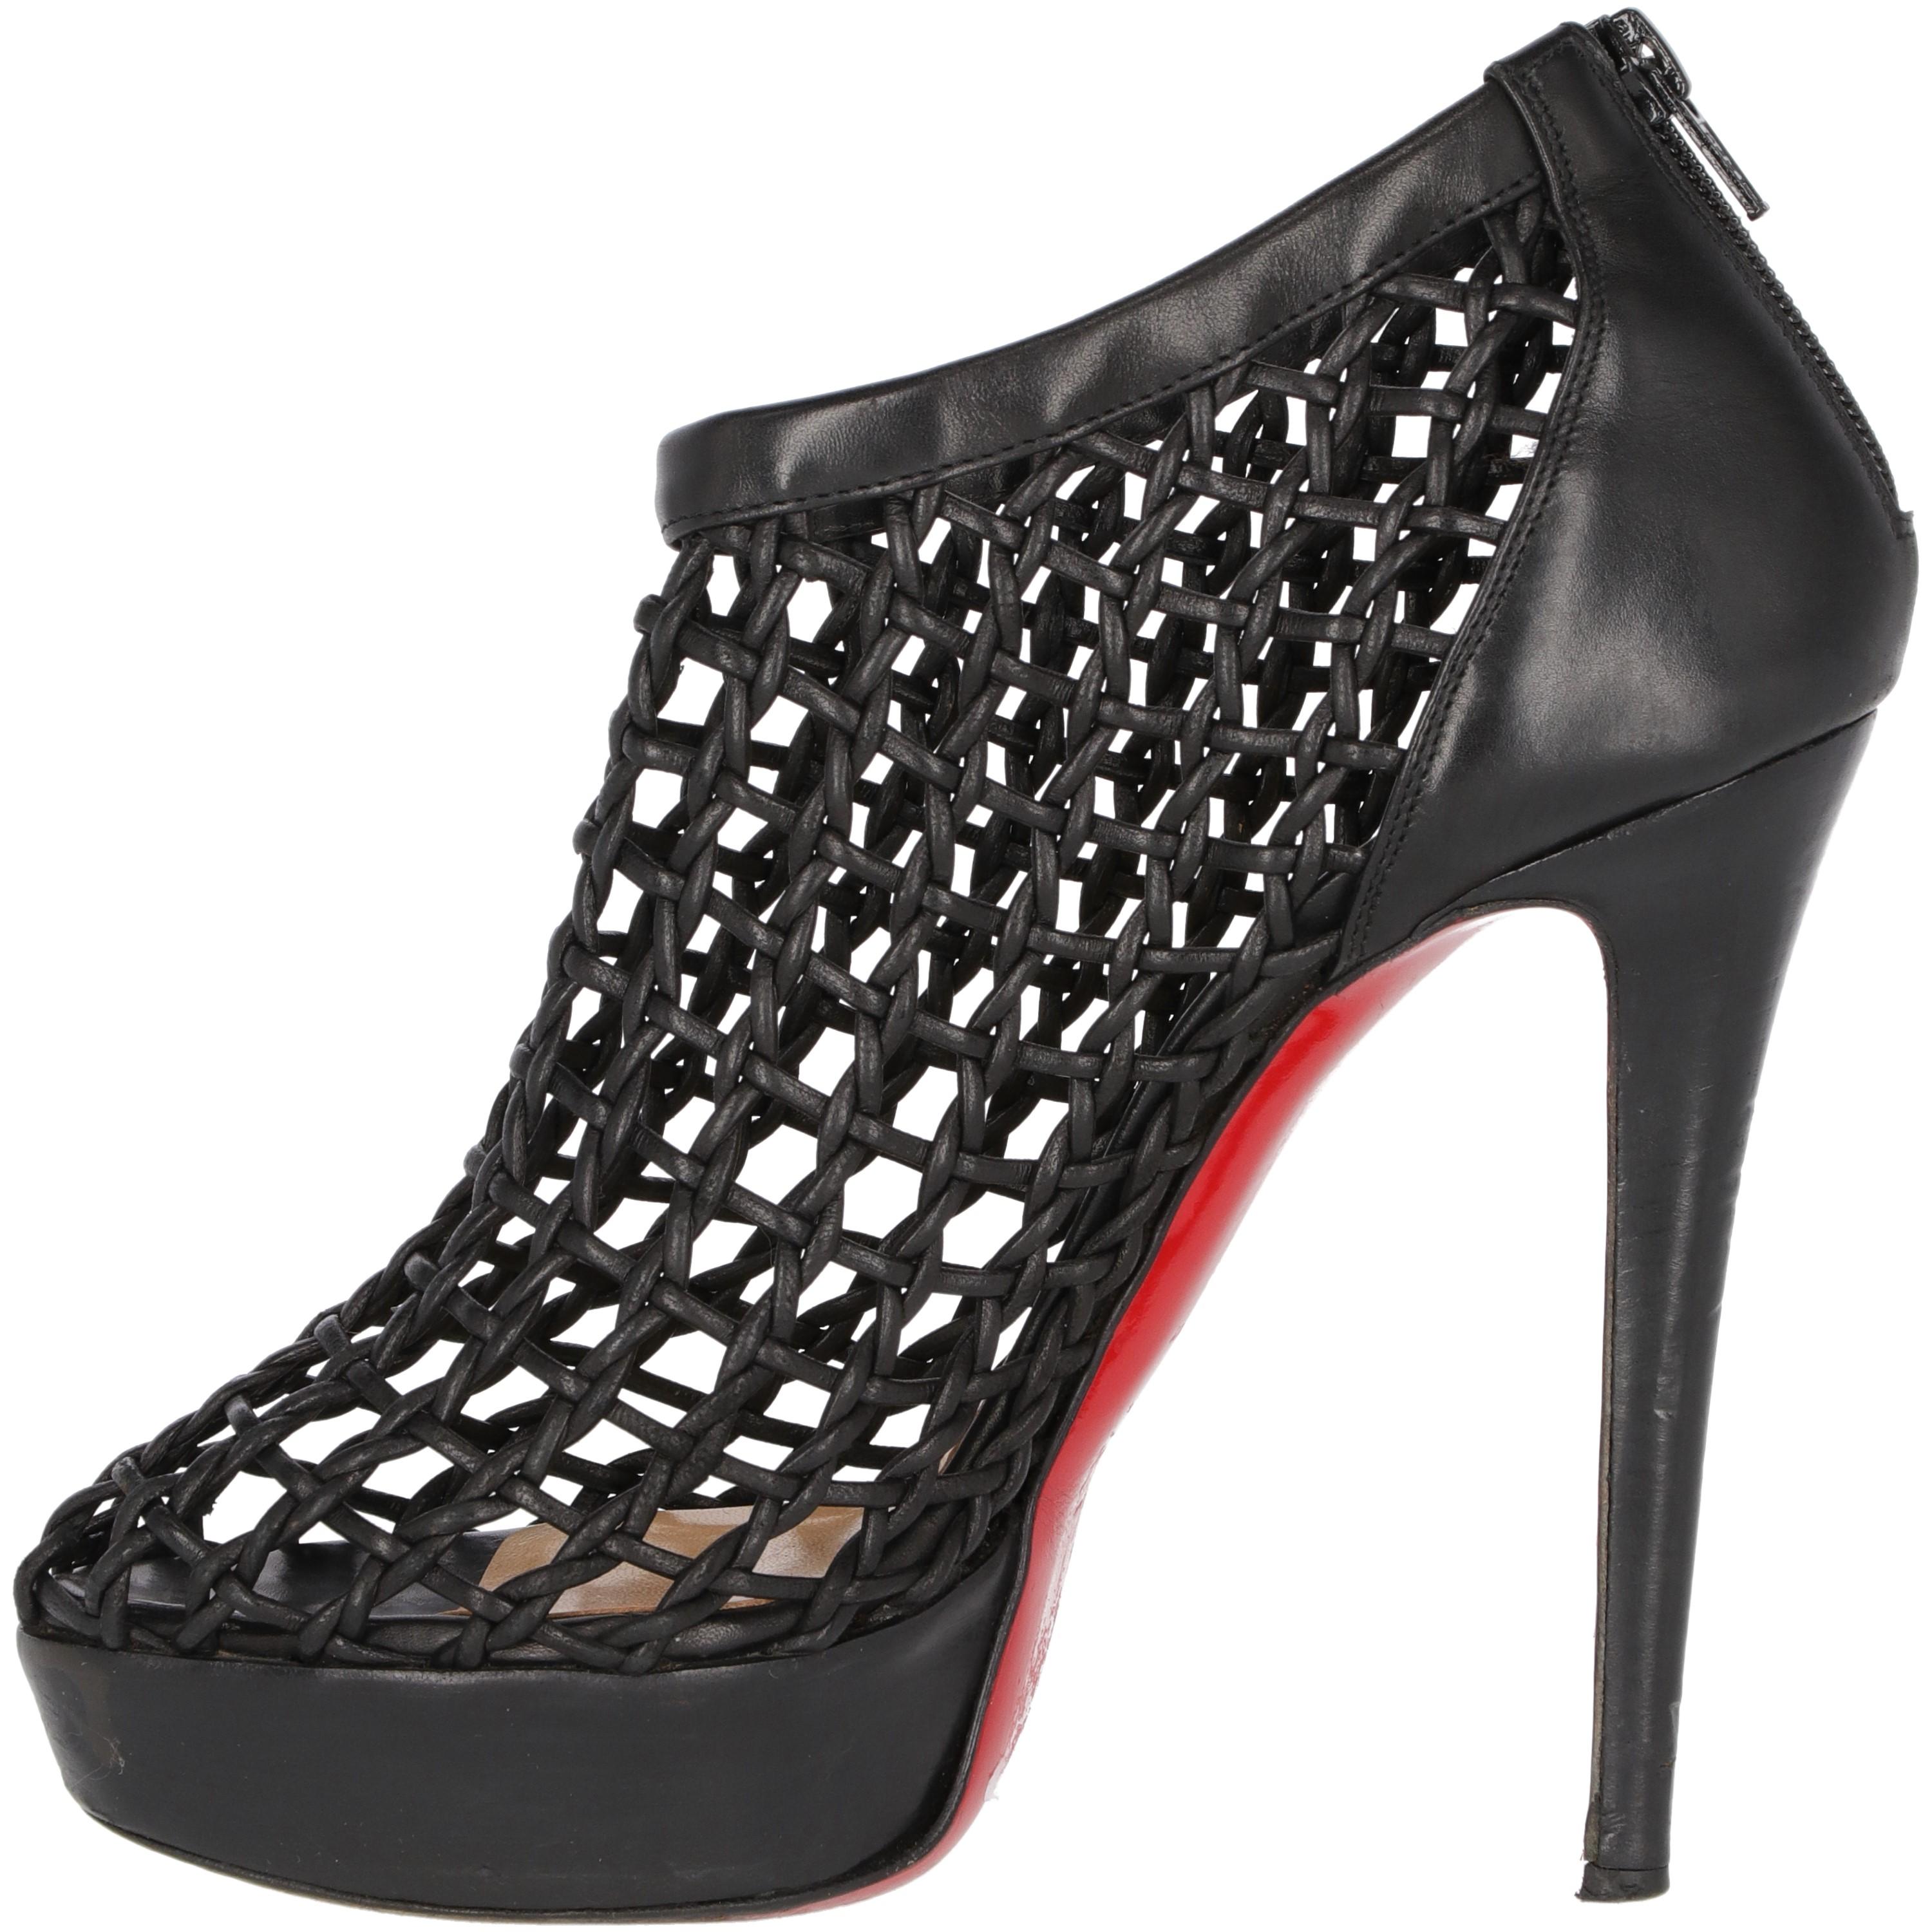 2010s Christian Louboutin Leather Pumps 1